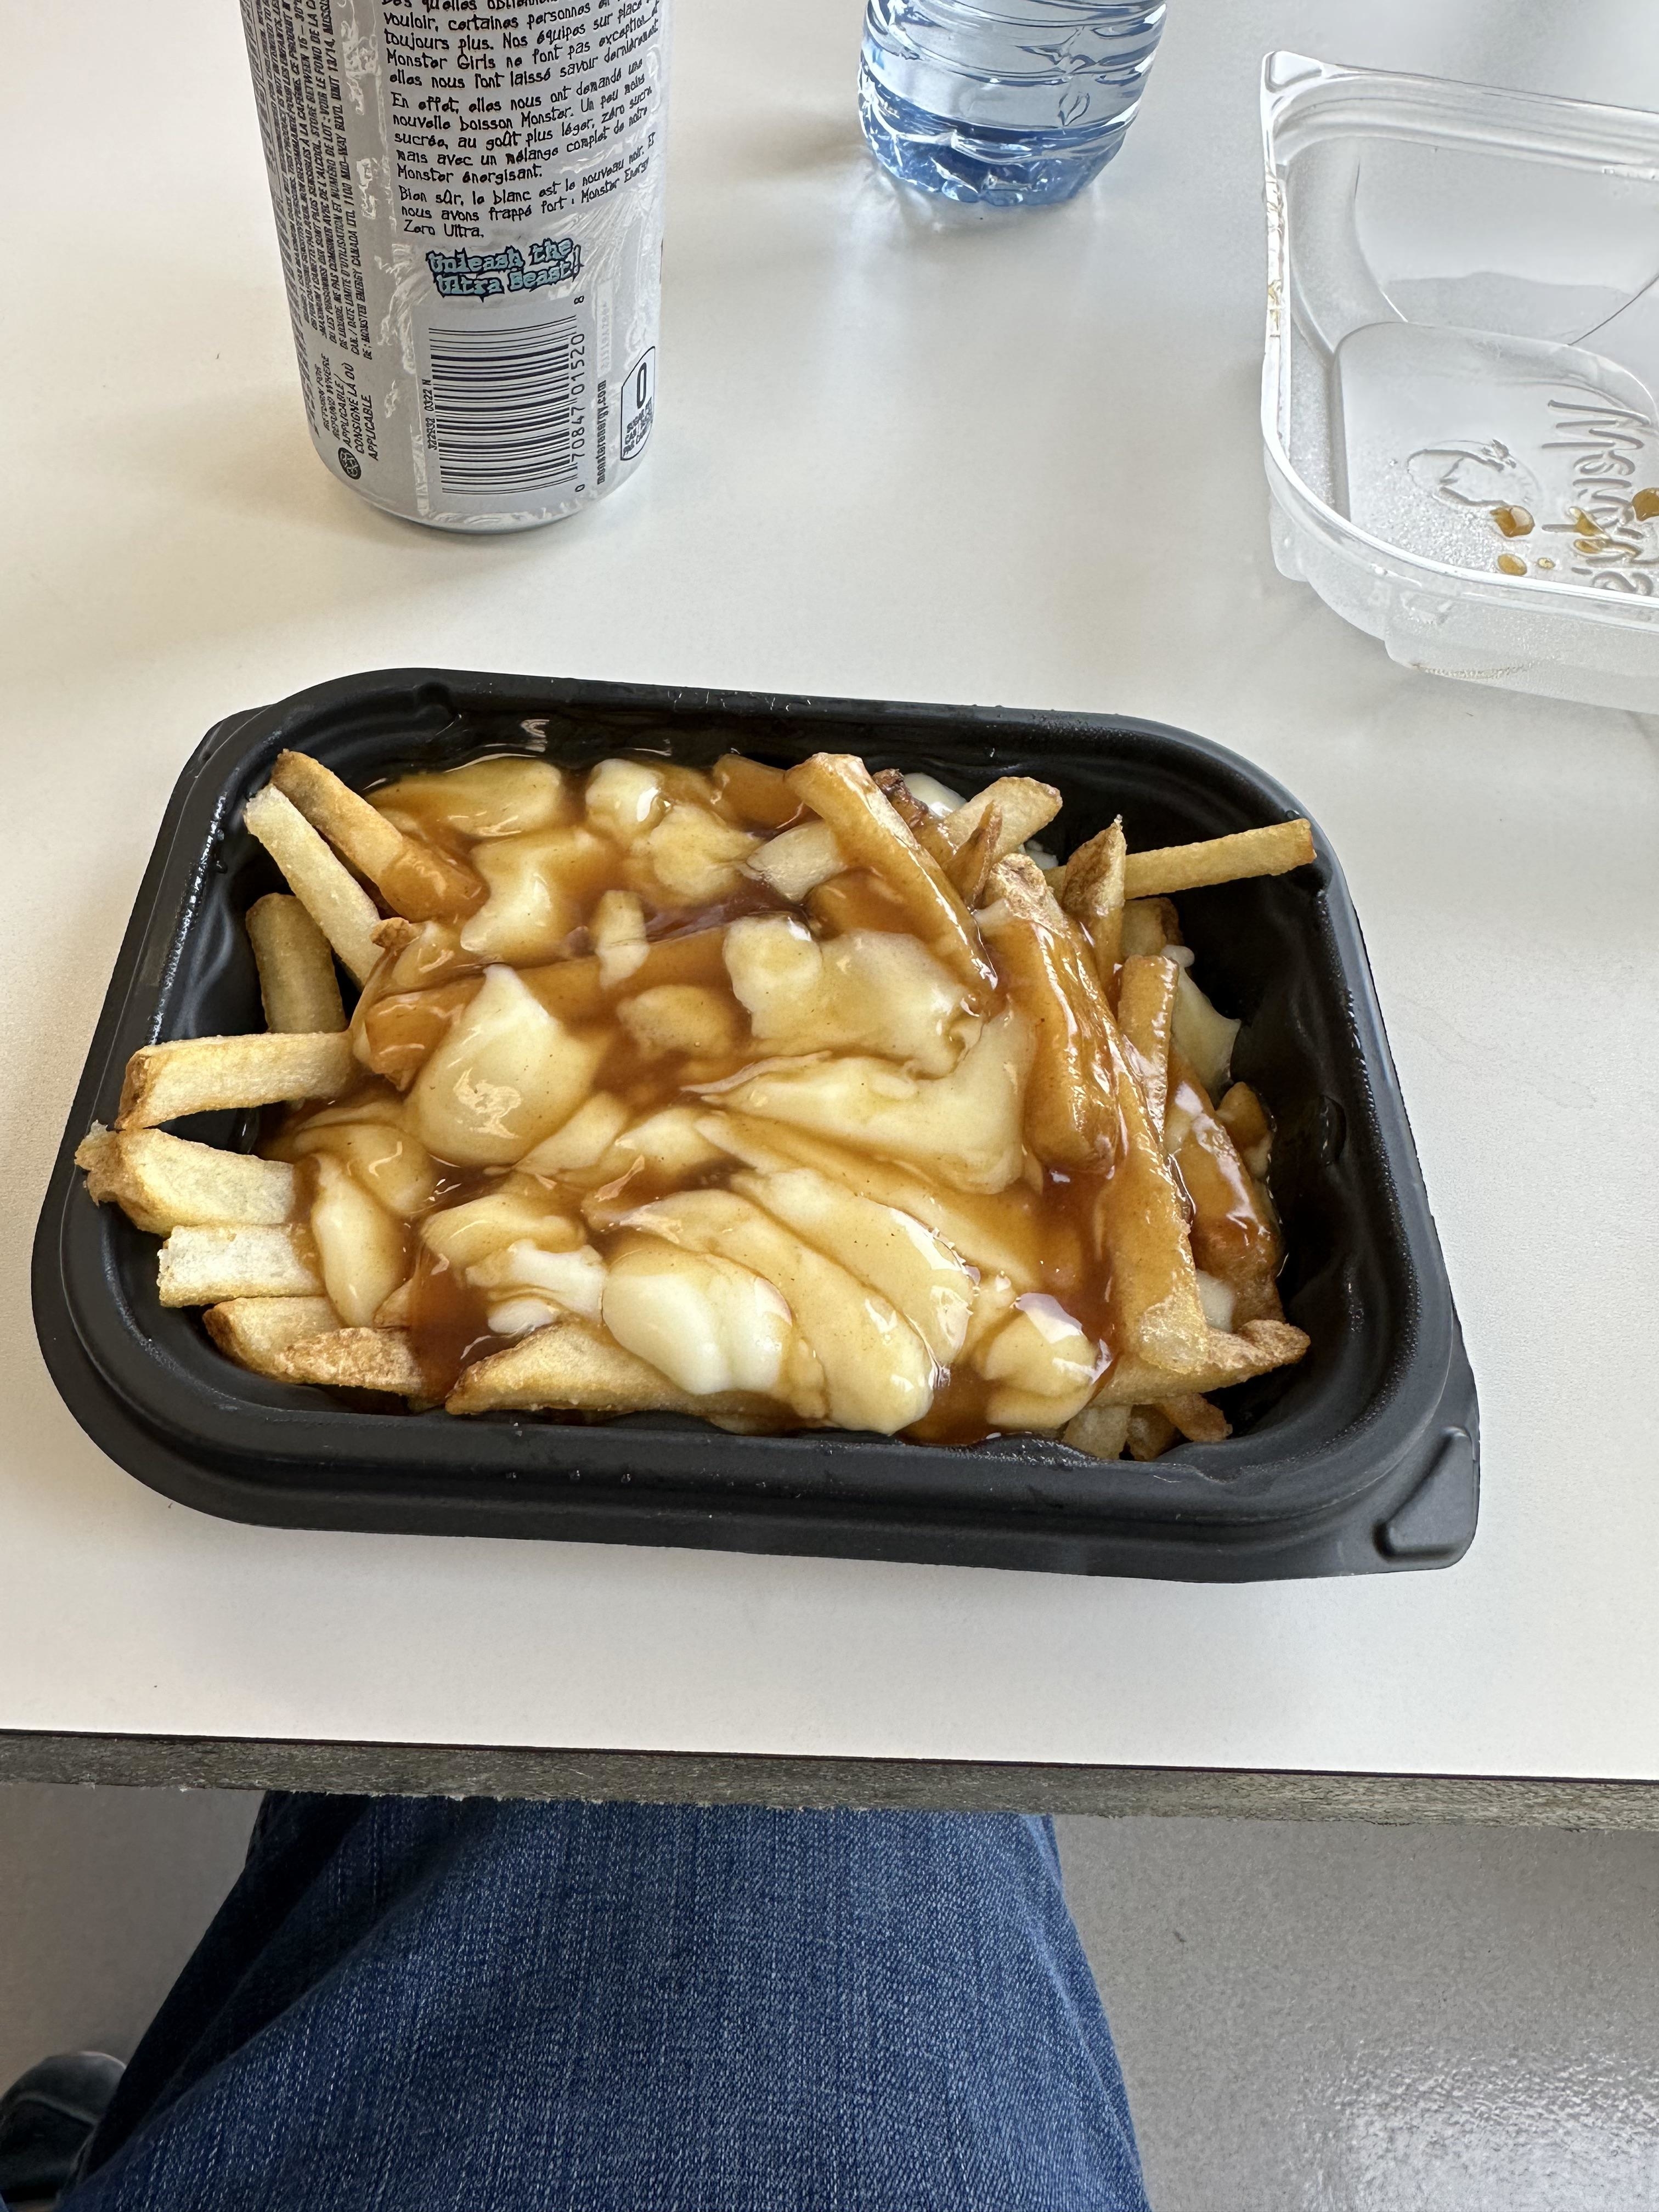 fries, gravy, and melted cheese in a to-go box